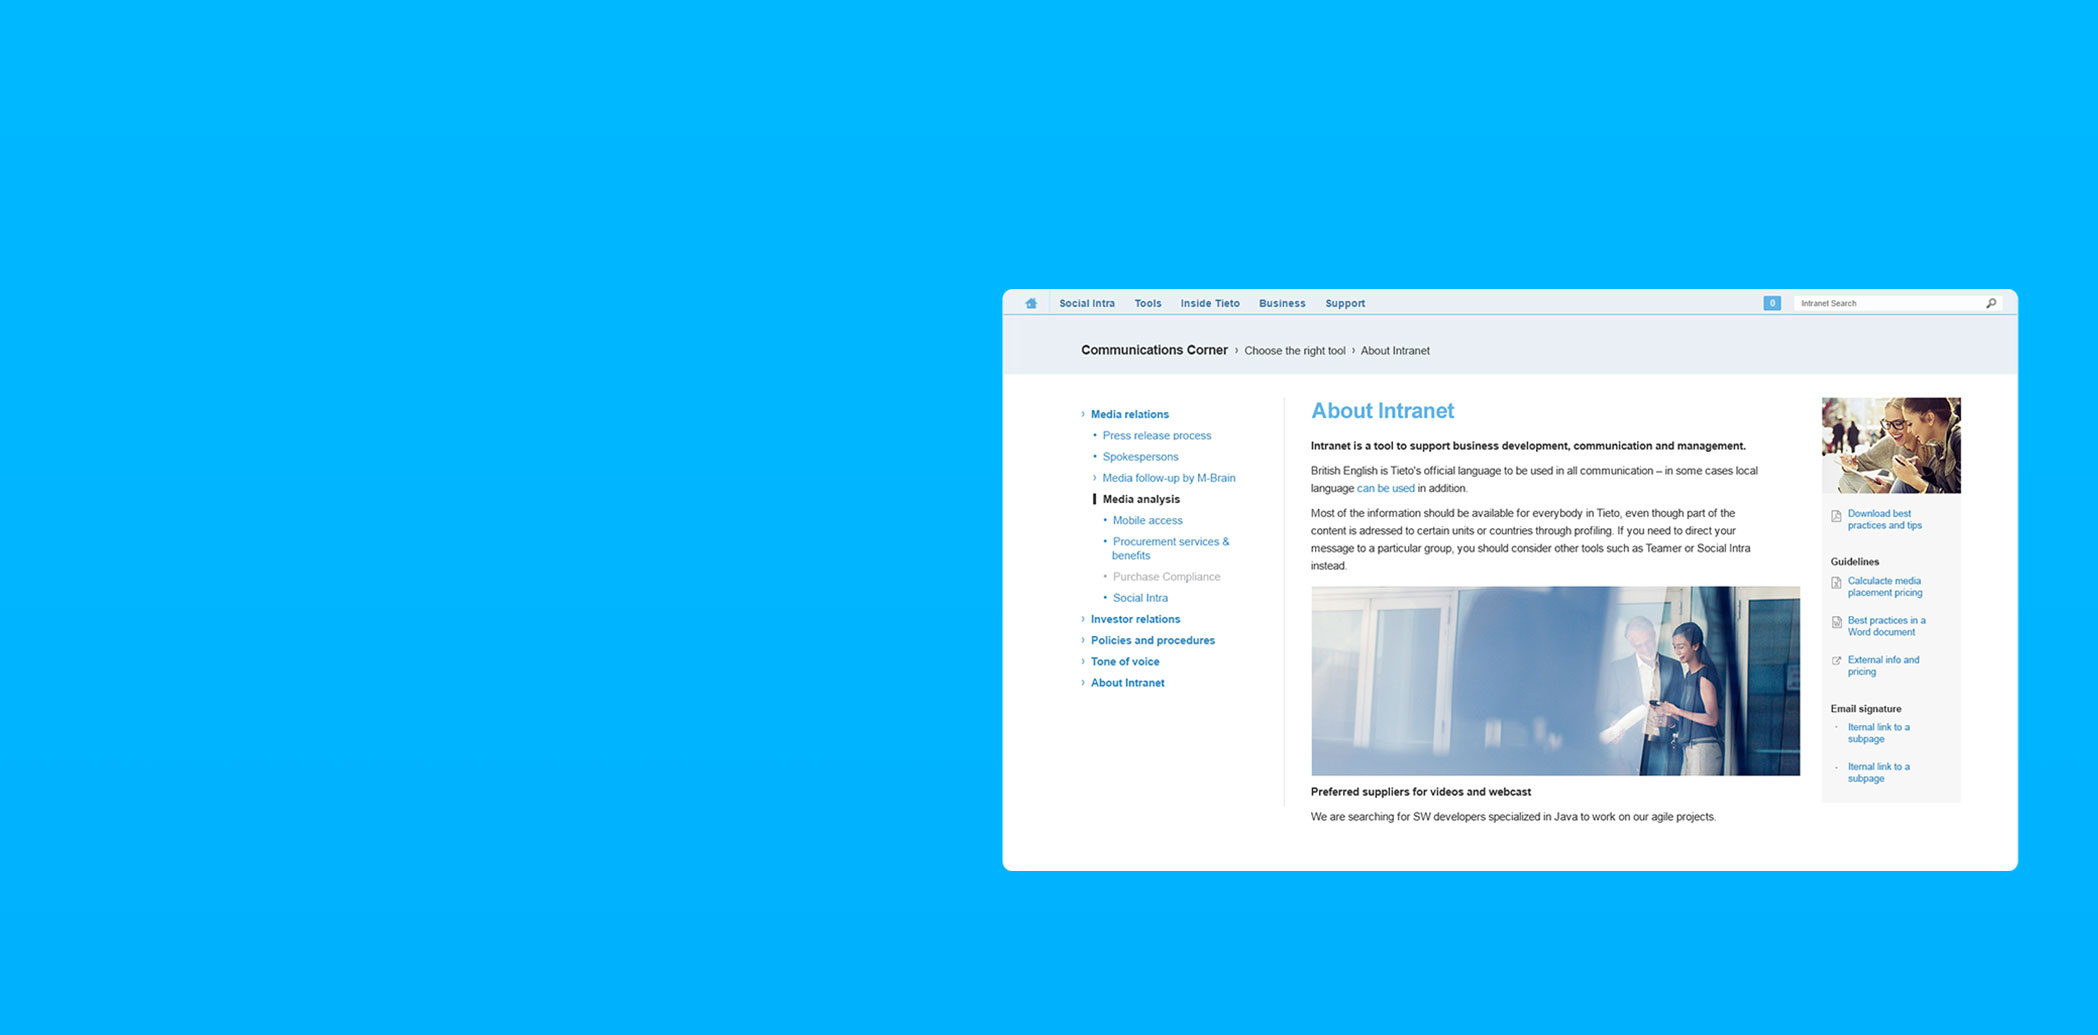 Drupal built: Intranet and content distribution system